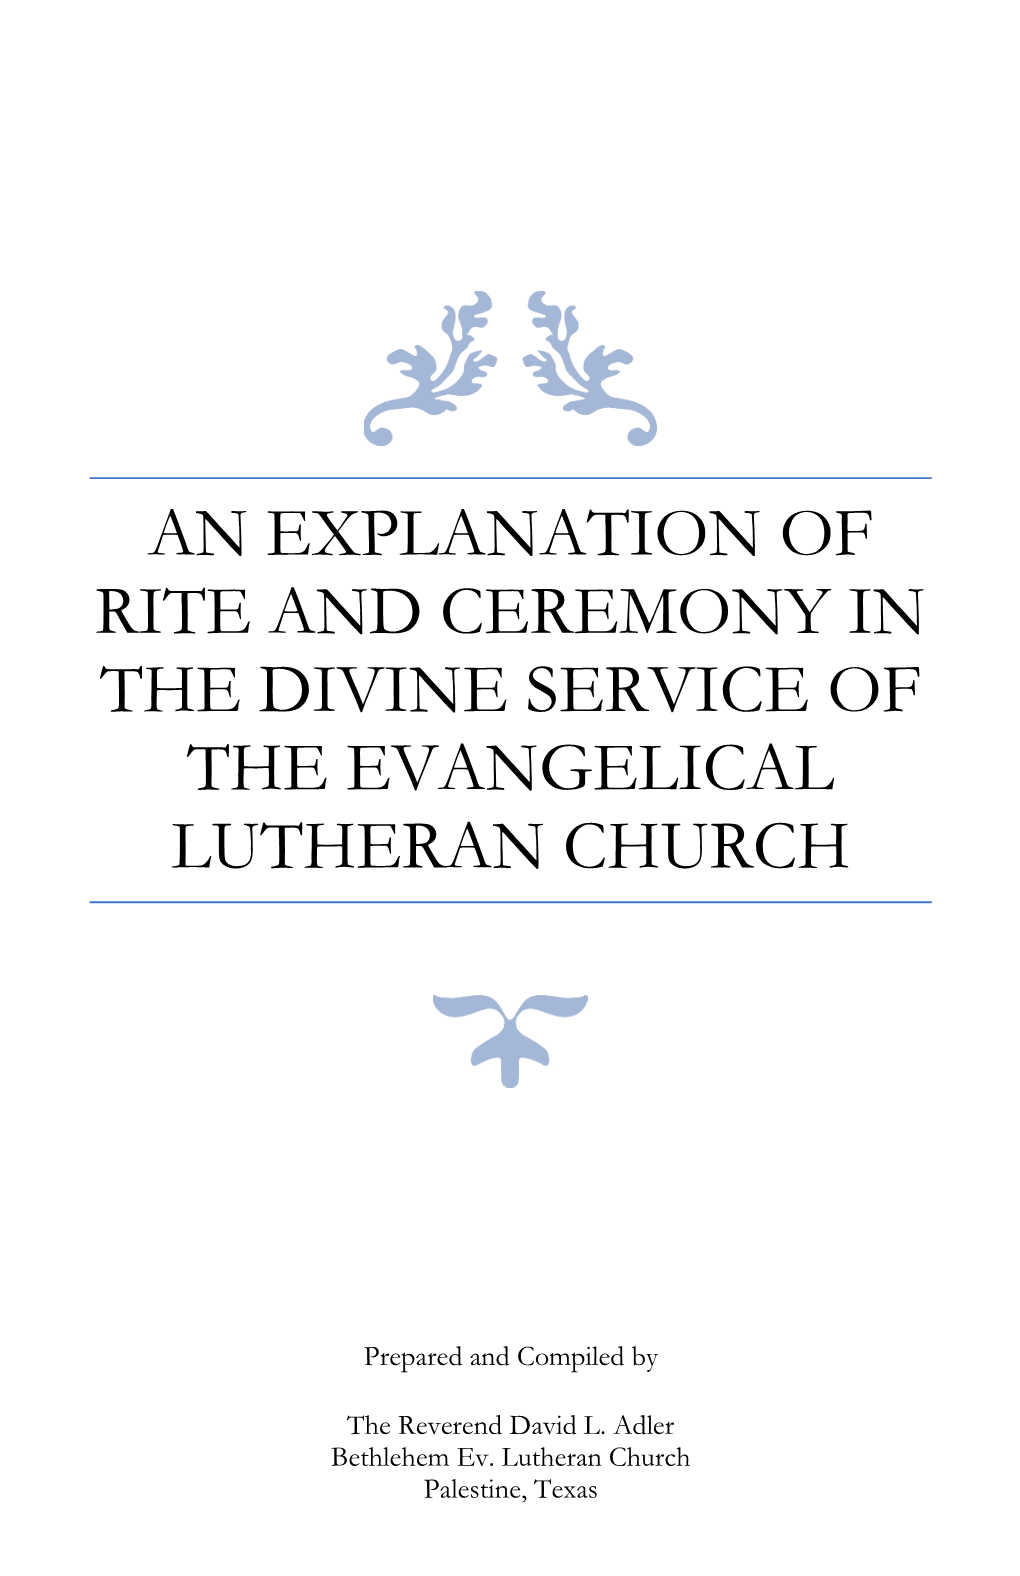 The Lutheran Liturgy Explained